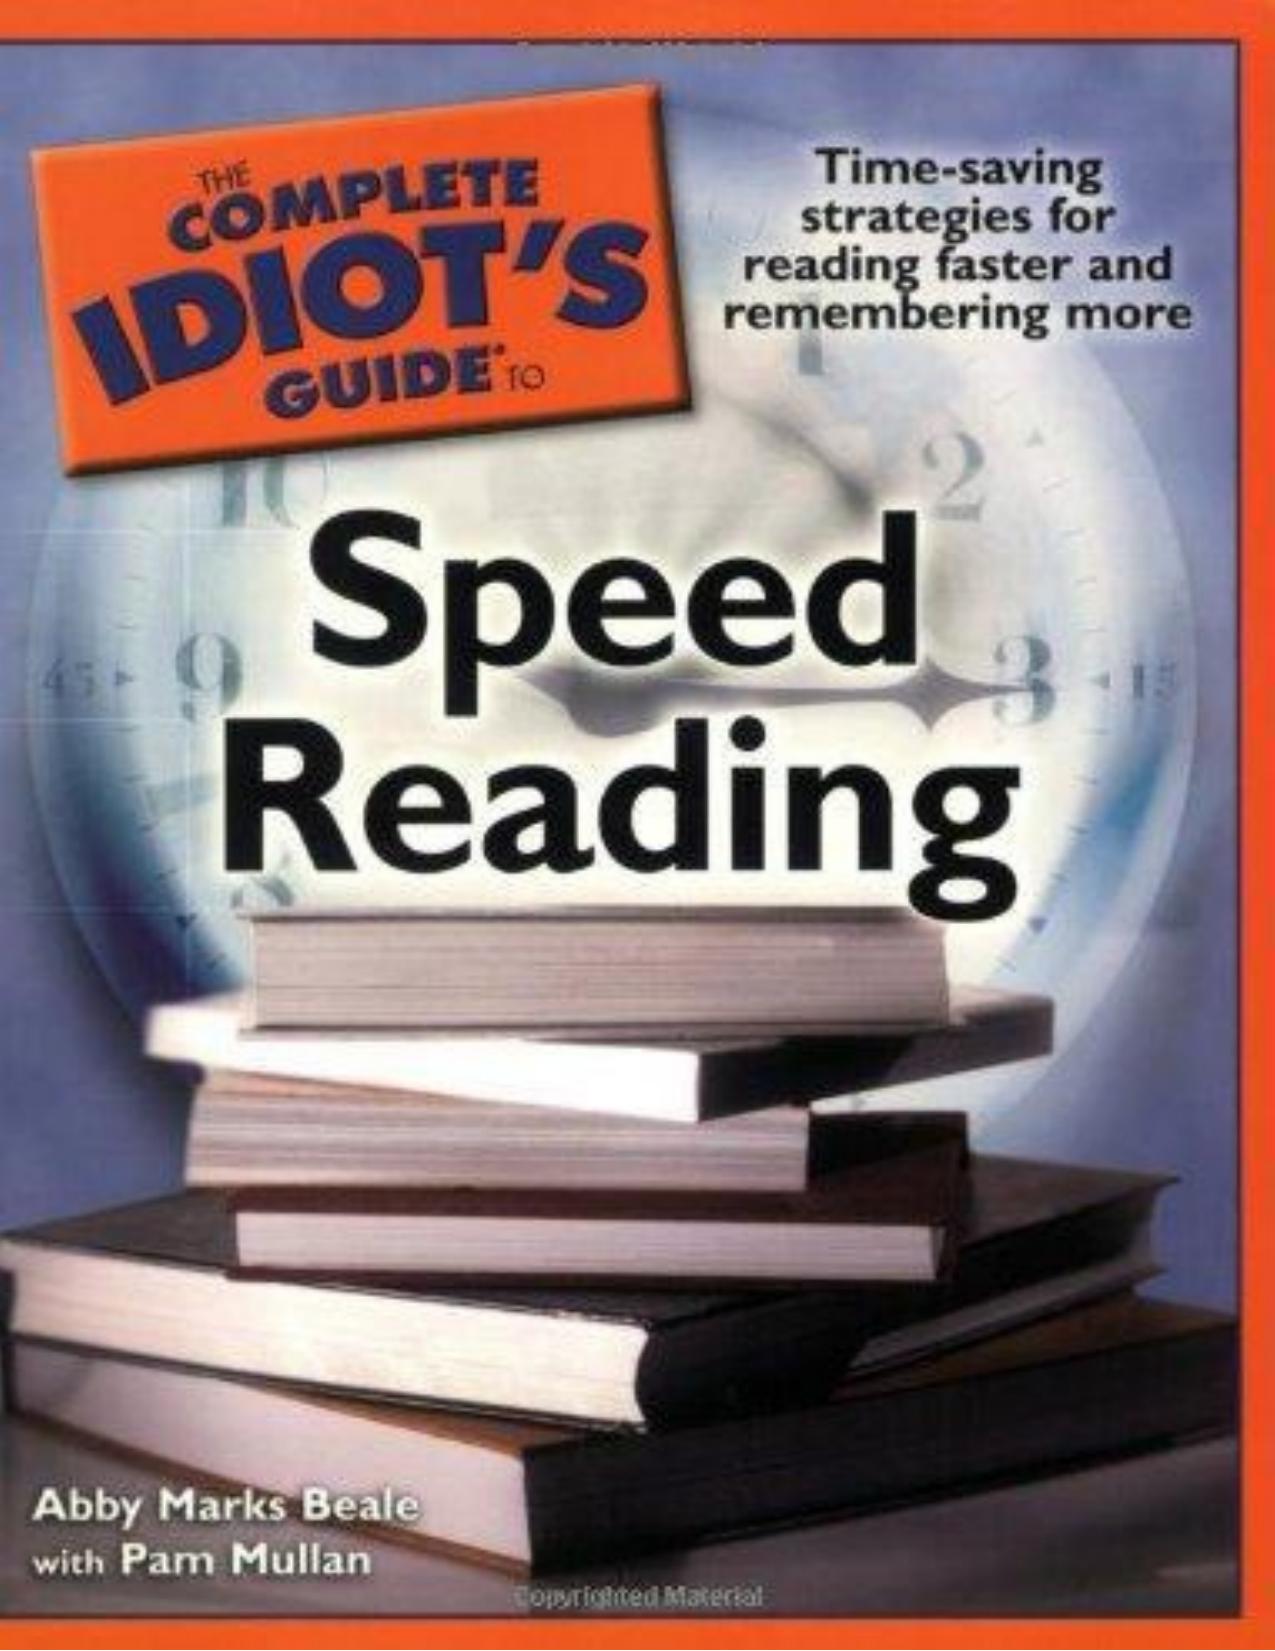 The Complete Idiot's Guide to Speed Reading by Abby Marks Beale; Pam Mullan